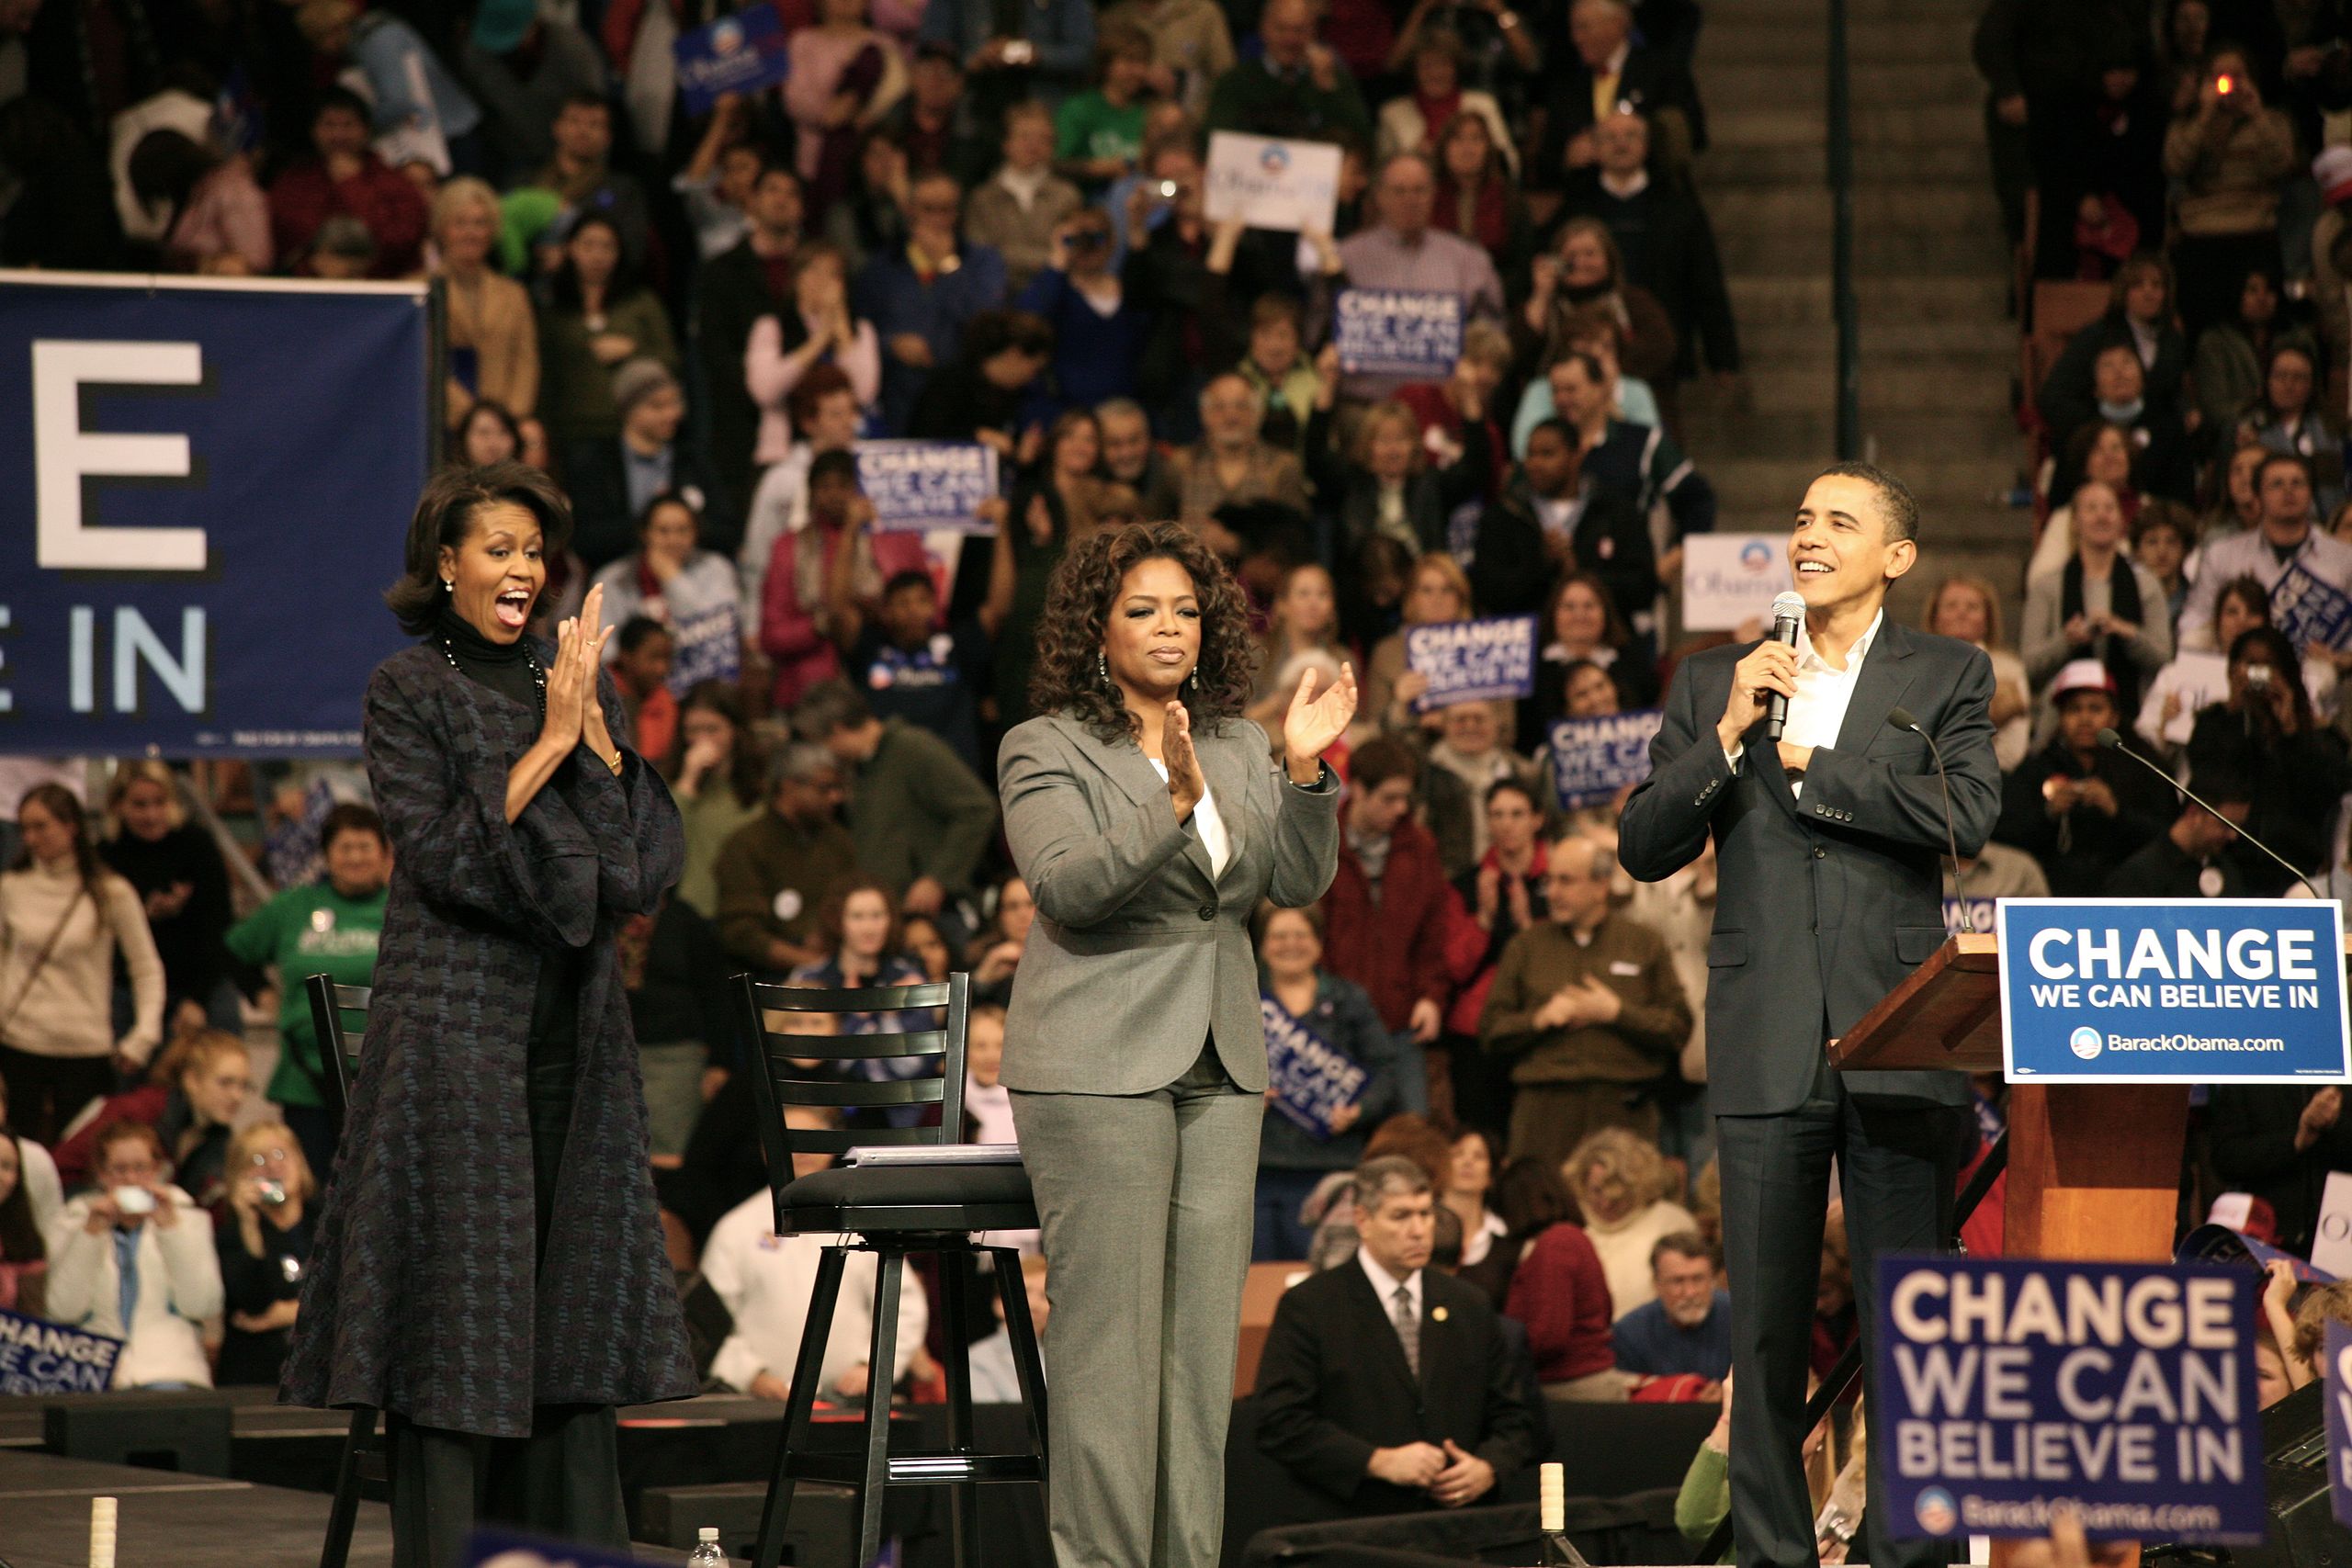 Oprah Winfrey joins Michelle and Barack Obama in 2007. Photo courtesy of Wikipedia